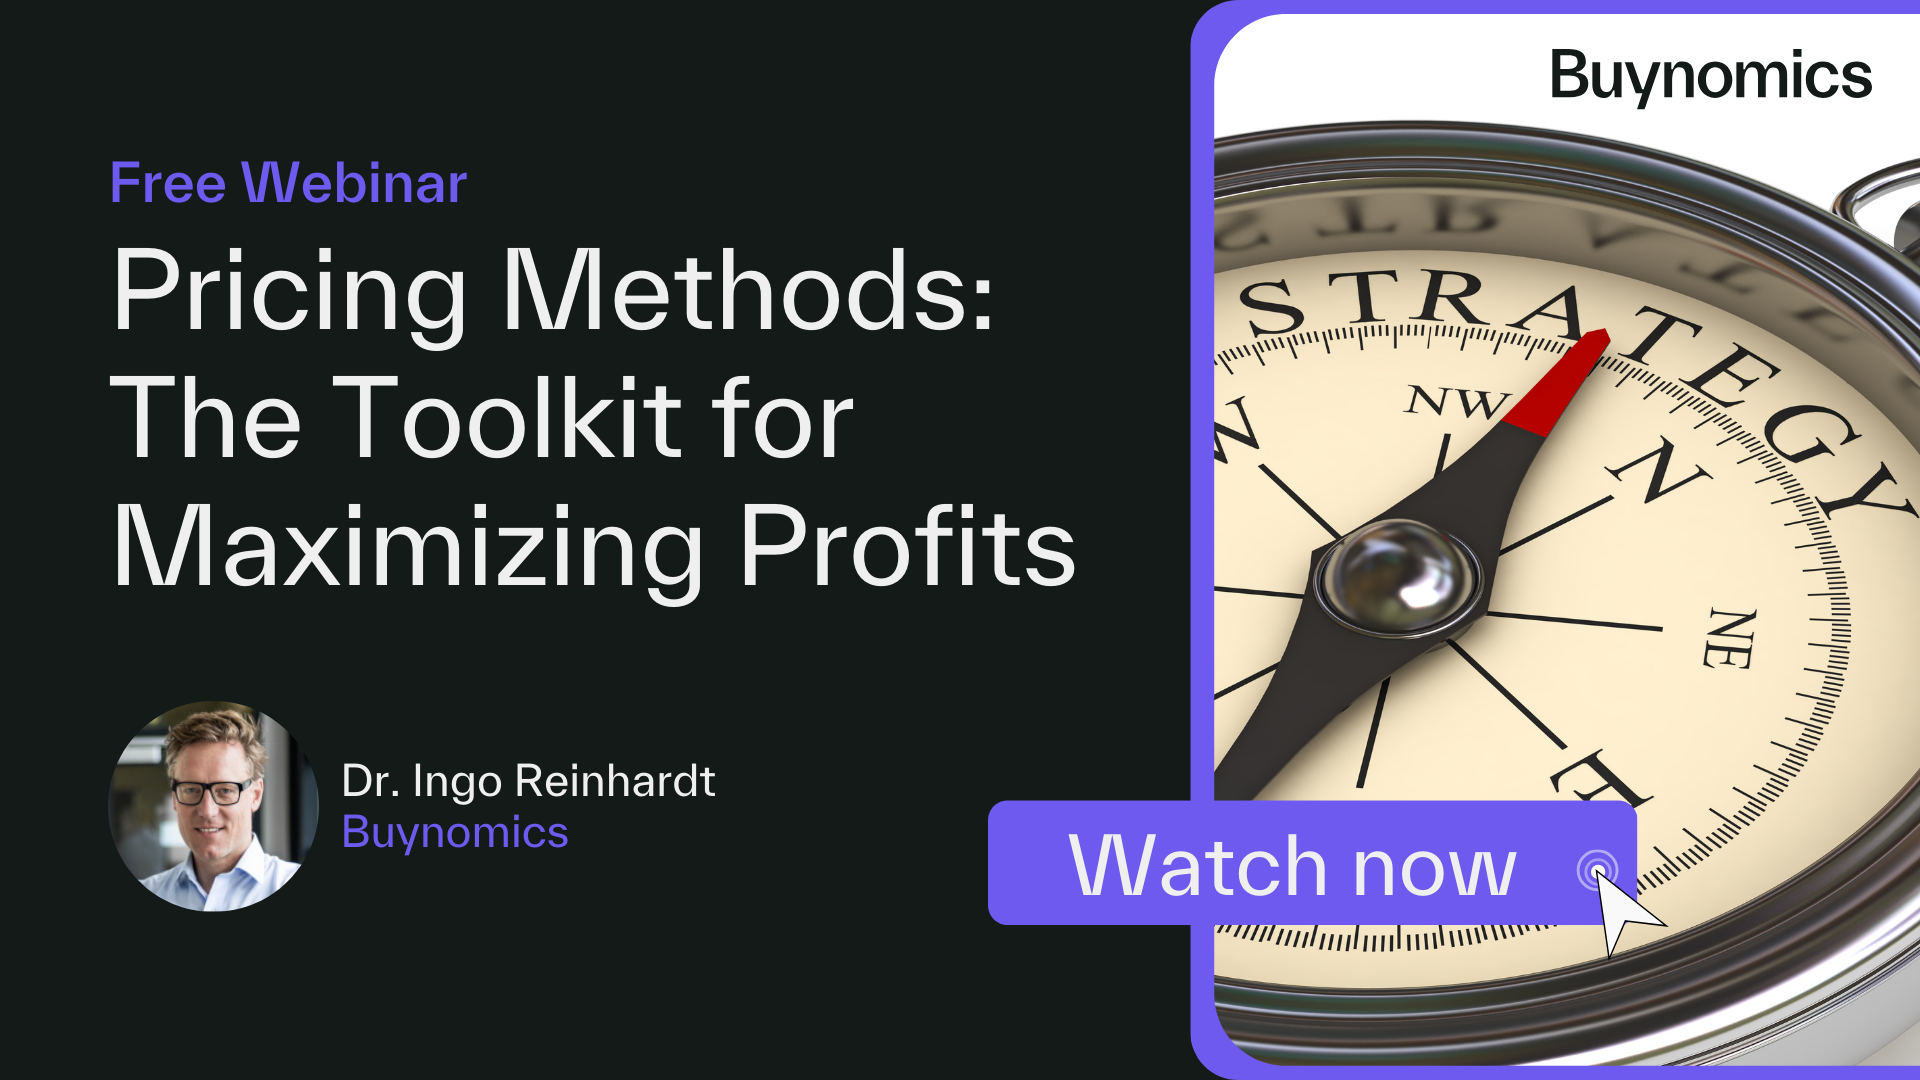 Pricing Methods: The Toolkit for Maximizing Profits